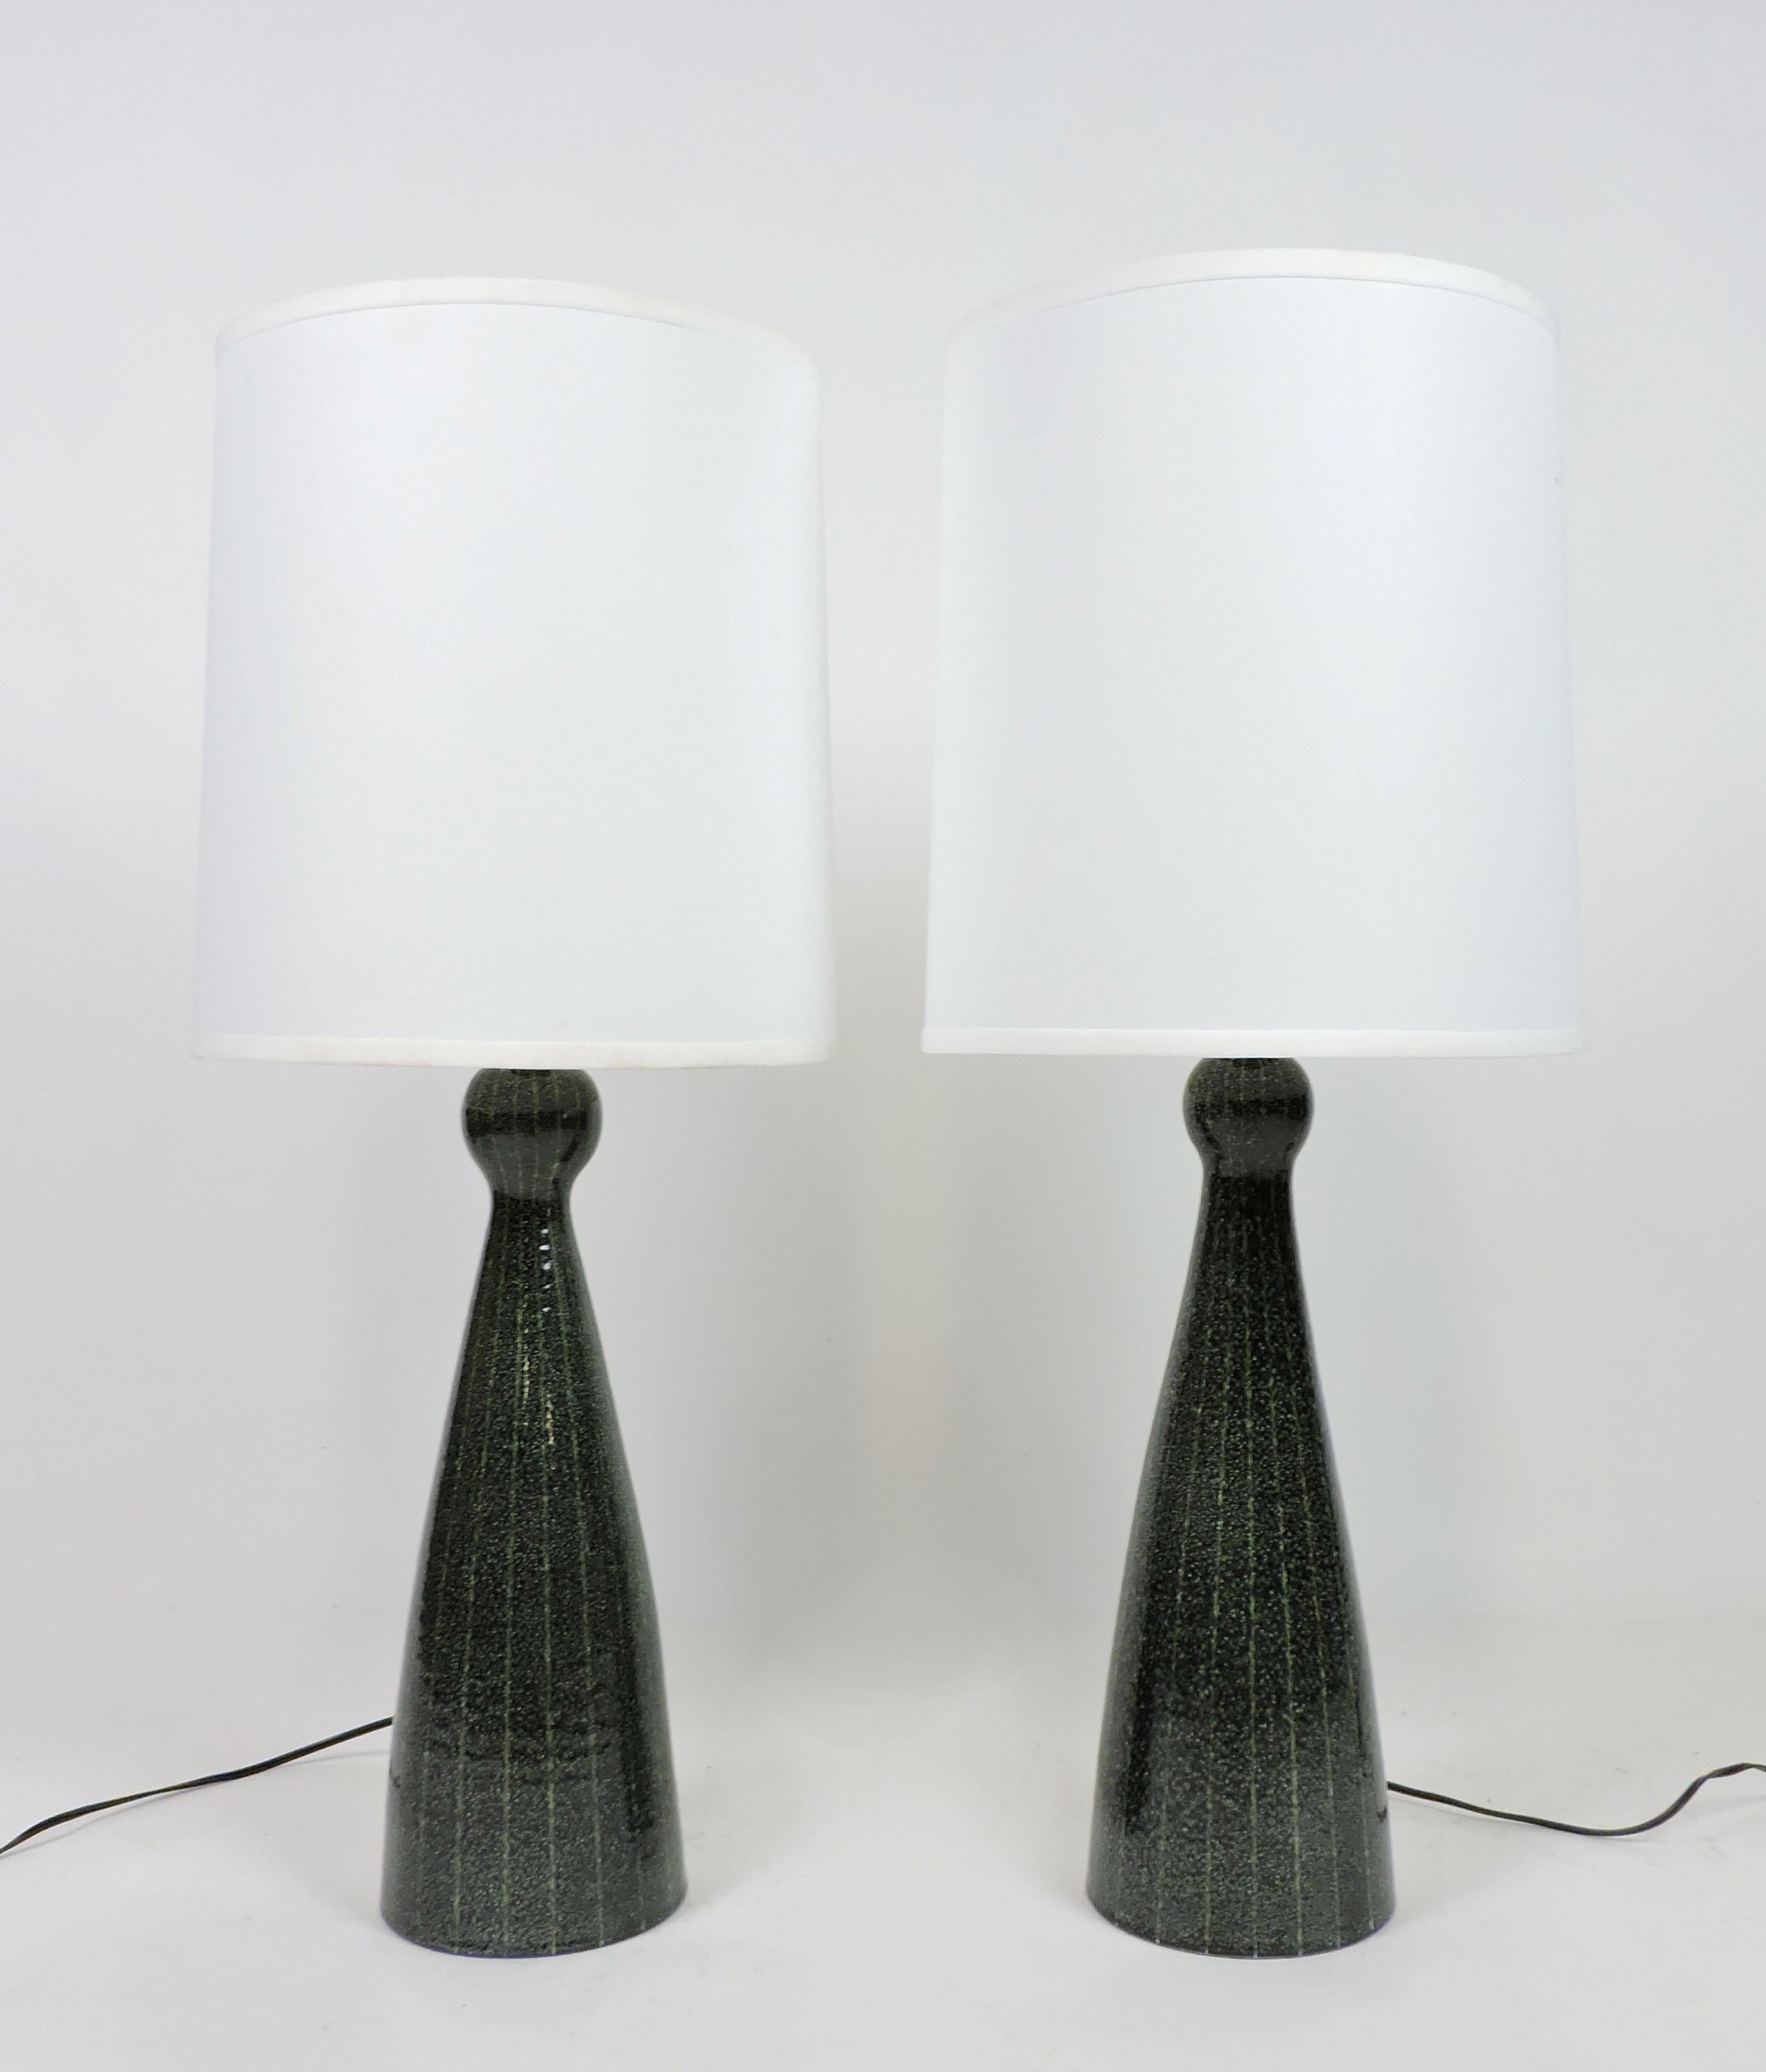 Handsome pair of large Italian ceramic table lamps made in Italy and possibly by Bitossi. These lamps have a beautiful dark green glaze and a curvy, bulbous shape. The bottoms are numbered and signed, Italy, B. 
The shades are not included.